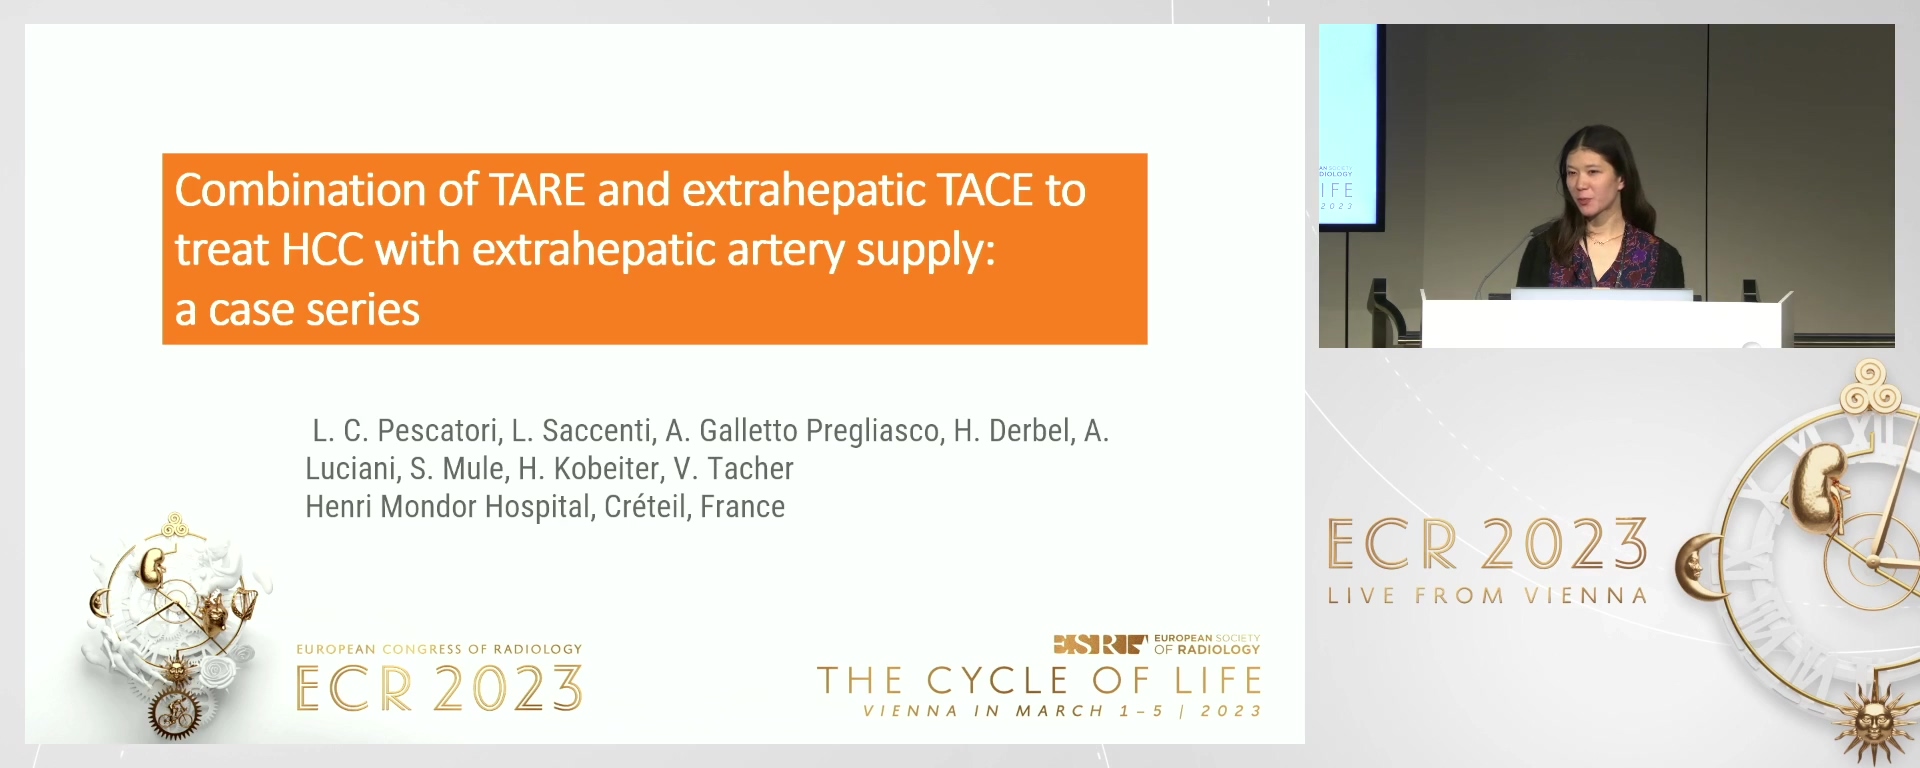 Combination of TARE and extrahepatic TACE to treat HCC with extrahepatic artery supply: a case series